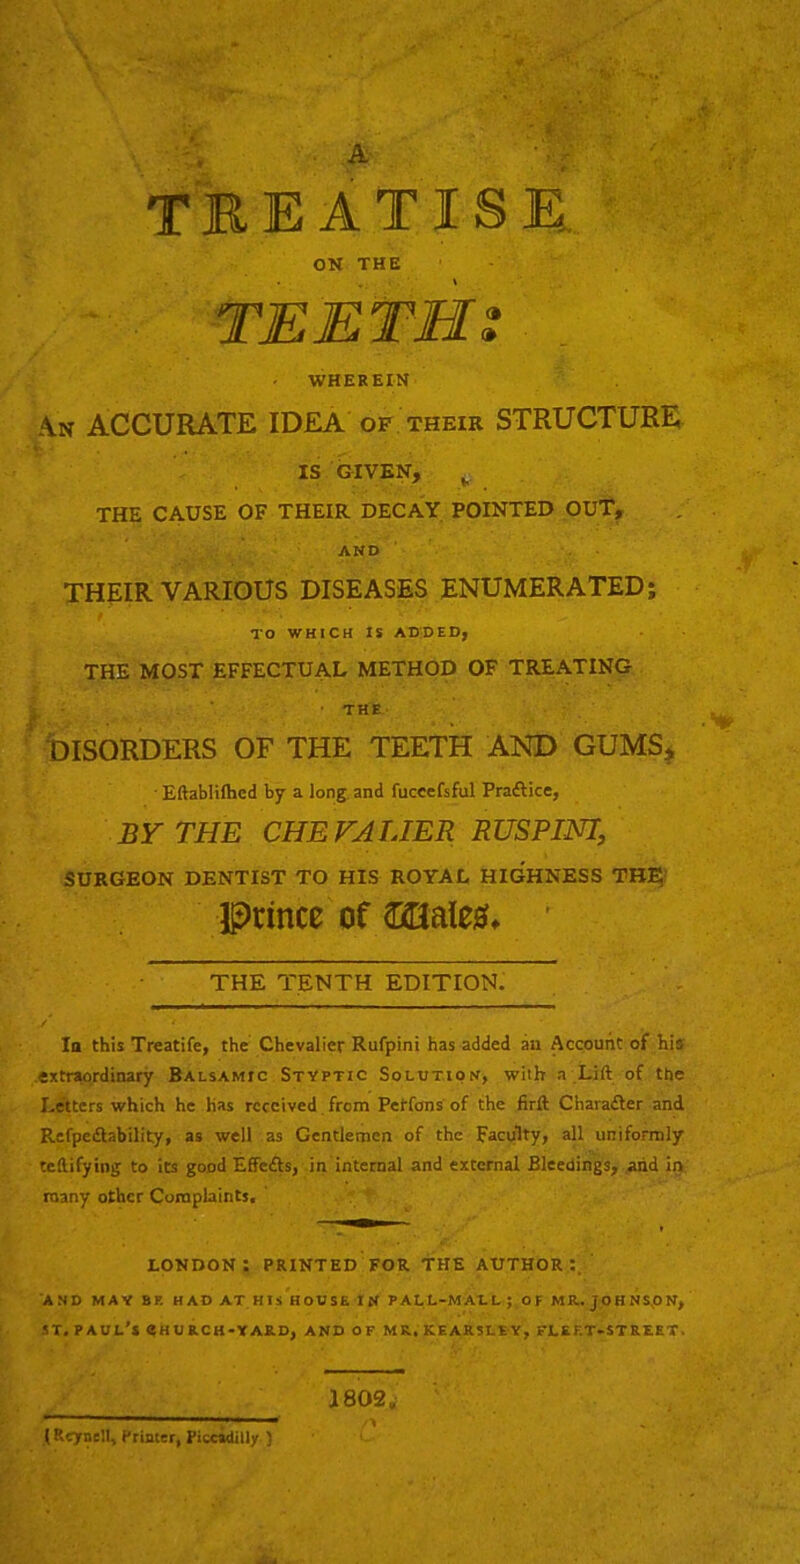 . .A TREATISE. ON THE TEETH s ■ WHEREIN N ACCURATE IDEA of their STRUCTURE IS GIVEN, THE CAUSE OF THEIR DECAY POINTED OUt, AND THpIR VARIOUS DISEASES ENUMERATED; TO WHICH IS ADDED, THE MOST EFFECTUAL METHOD OF TREATING • THE- DISORDERS OF THE TEETH AND GUMS^ • Eftablilhcd by a long, and fuccefsful Praftice, BY THE CHE FALIER RUSPINI, SURGEON DENTIST TO HIS ROYAL HIGHNESS THp; prince of WM, THE TENTH EDITION. la this Treatife, the Chevalier Rufpini has added an Account of his .extraordinary Balsamic Stvptic Solution, with a Lift of the Letters which he Has received from Petfons of the firft Charadler and Refpedlability, as well as Gentlemen of the Faculty, all uniformly teftifying to its good Effedls, in internal and external Bleedings, .aiid in. many other Coraphints, LONDON: PRINTED FOR THE AUTHOR:. AND MAY BR HAD AT HIS HOUSE IN P ALL-MAI. L ; O F MR.. JOHNS.ON, ST. Paul’s eHURCH-YAUD, and of mr.kearsley, fleet-street. i 802„ t Reynell, Printer, Piccidilly )